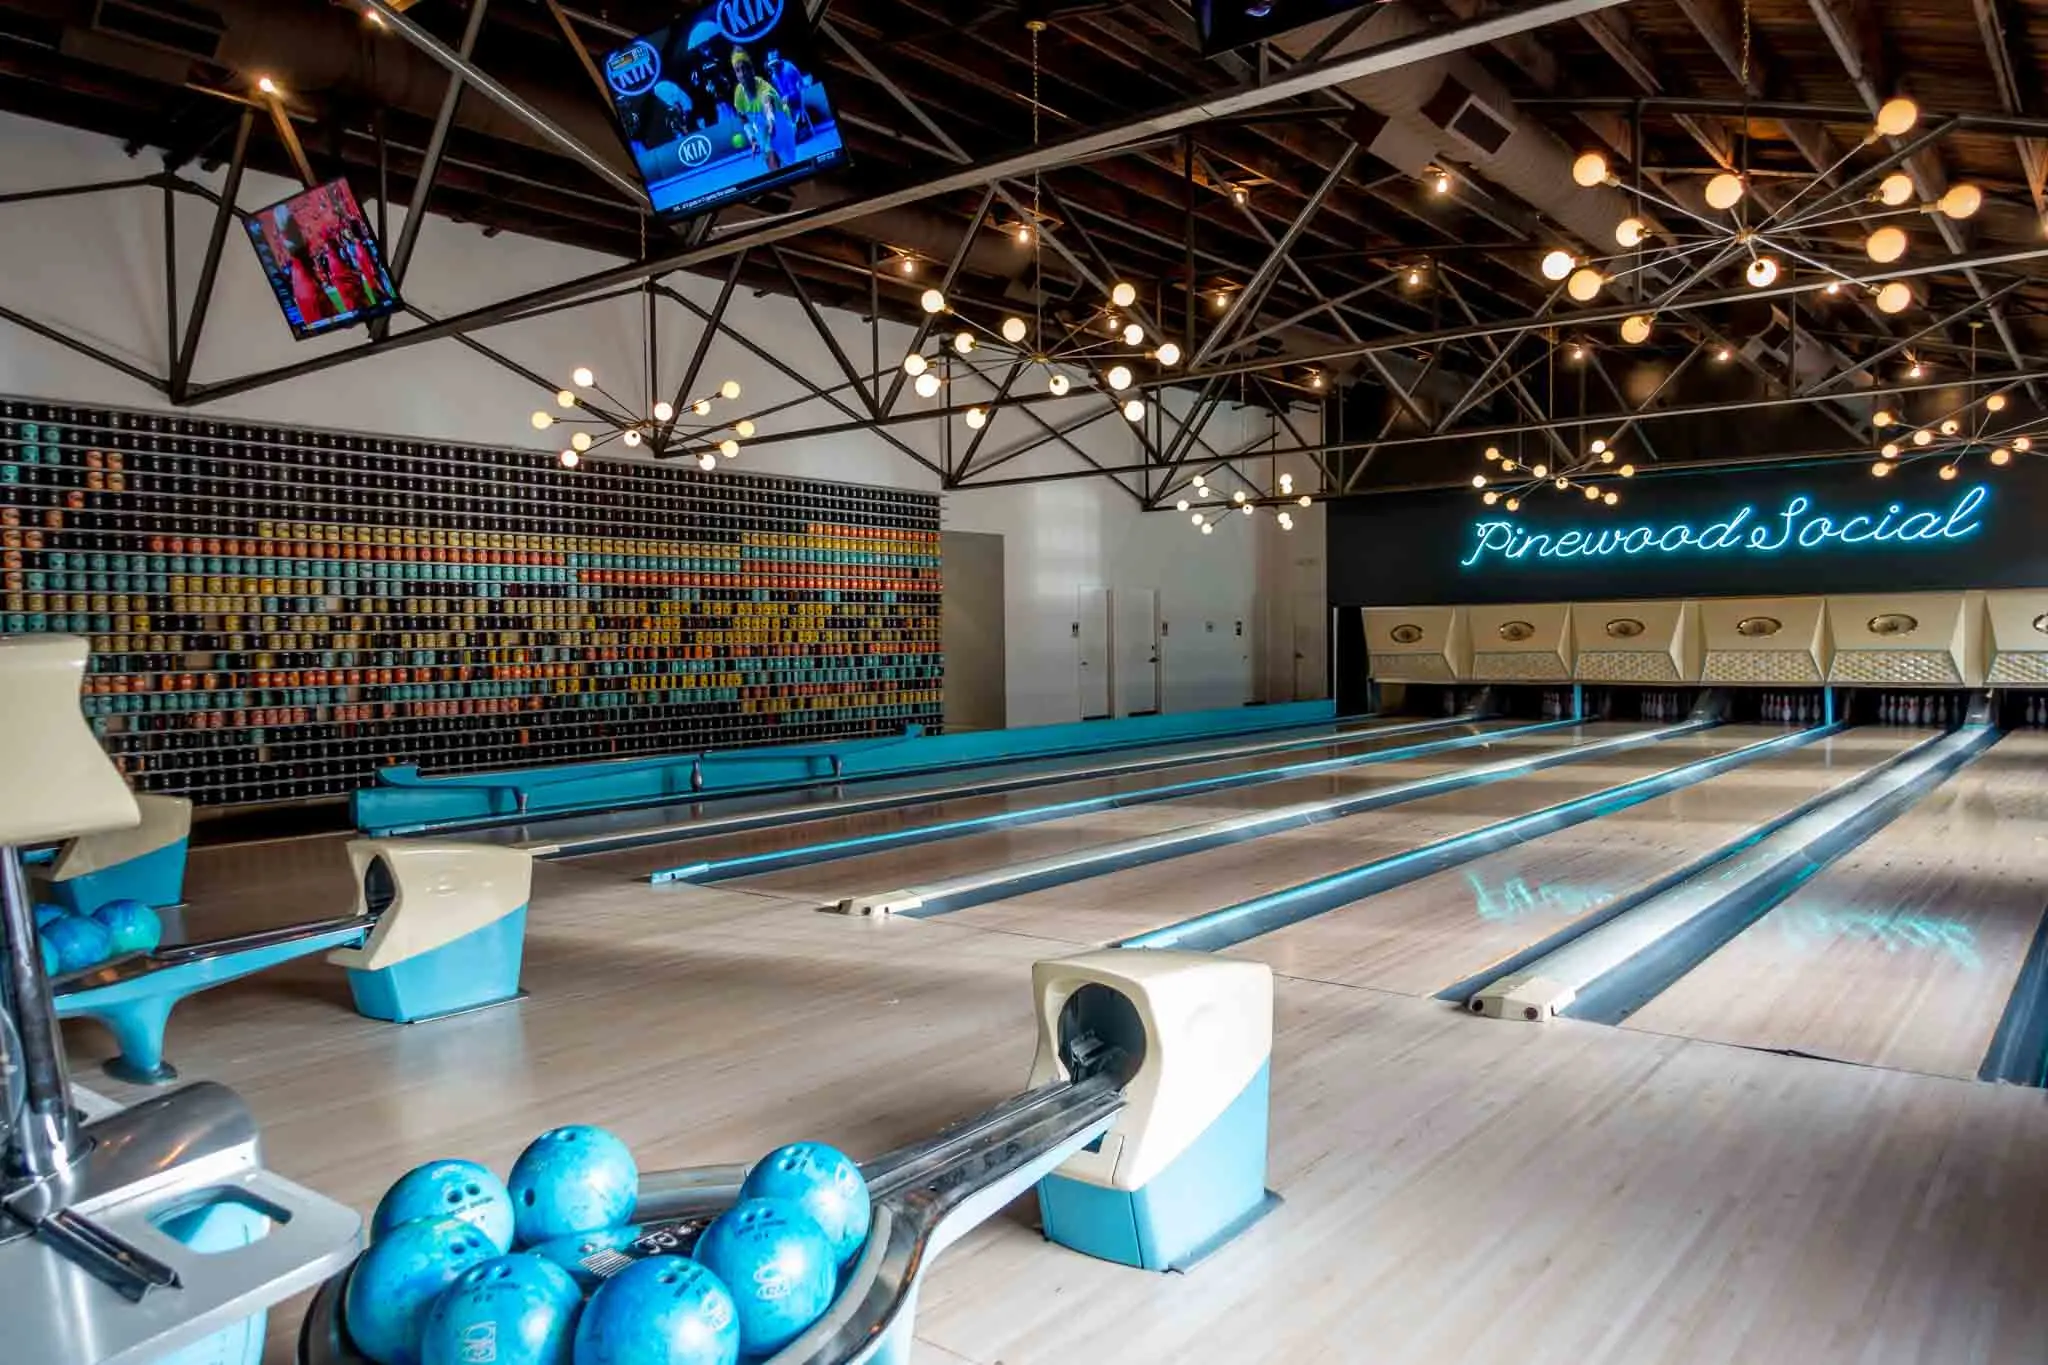 Blue bowling balls in a bowling alley with a sign for Pinewood Social